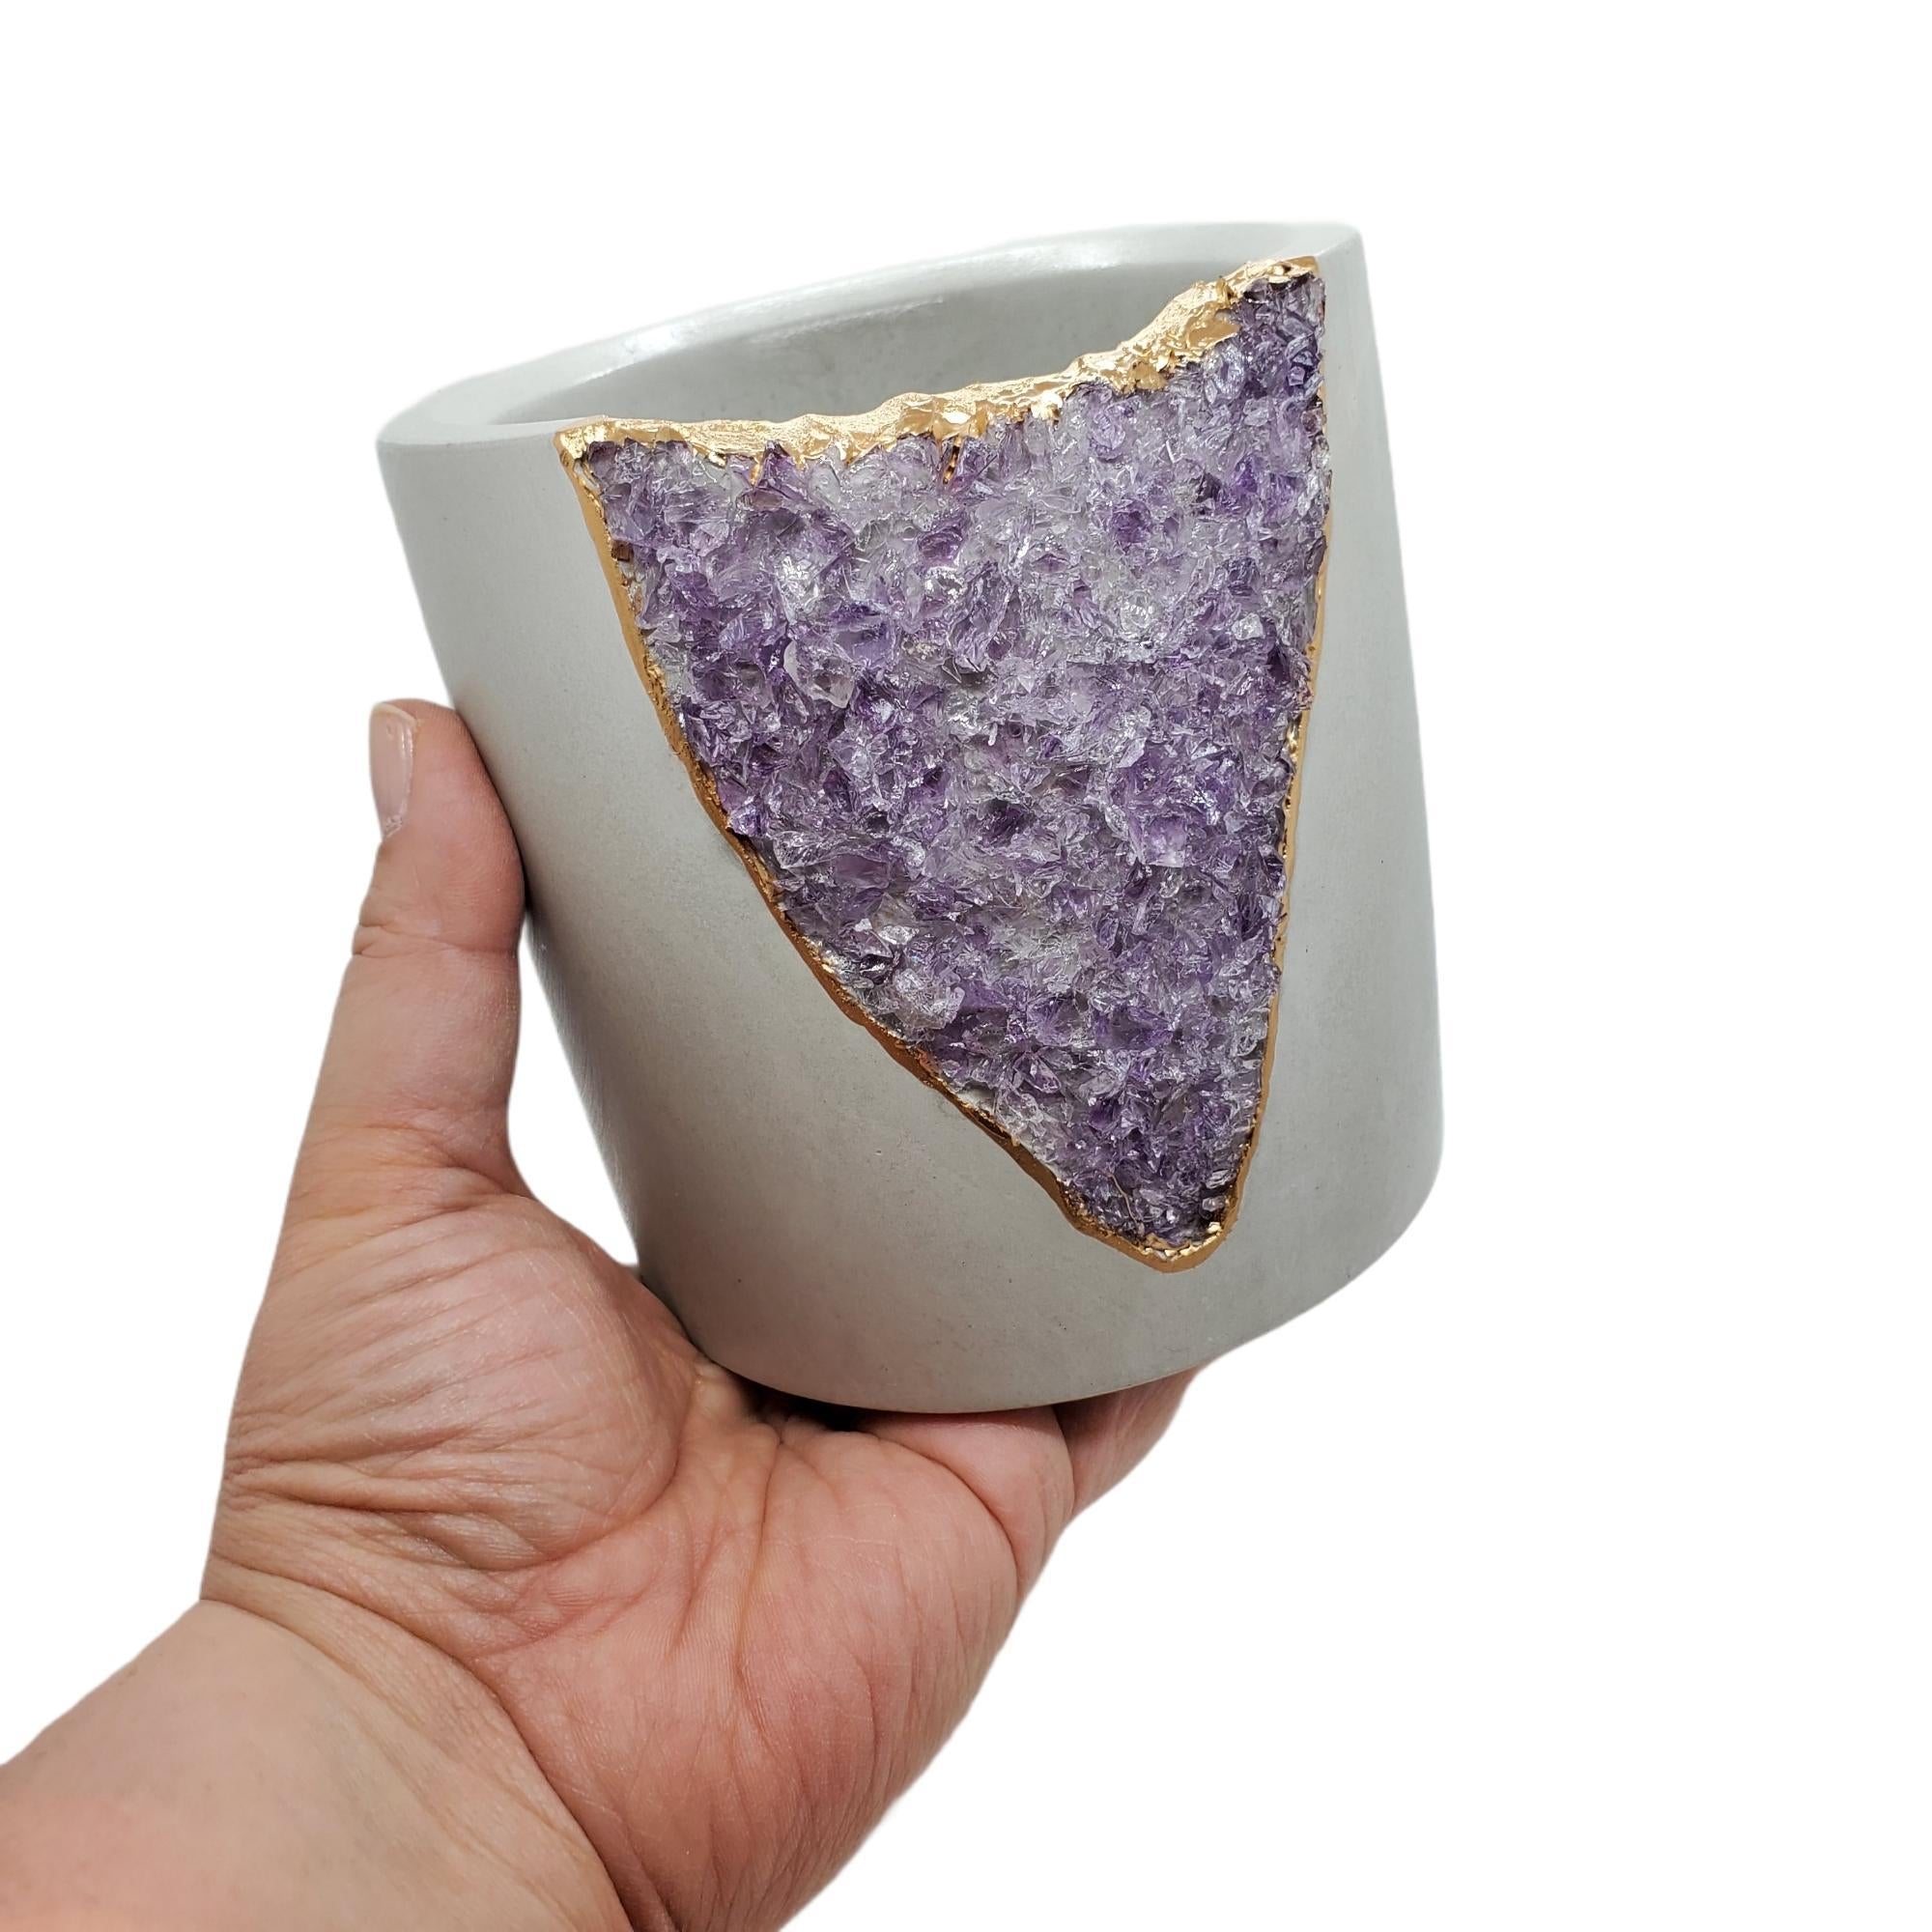 Planter - Large Geode Mod in Light Gray with Amethyst by Tal and Bert